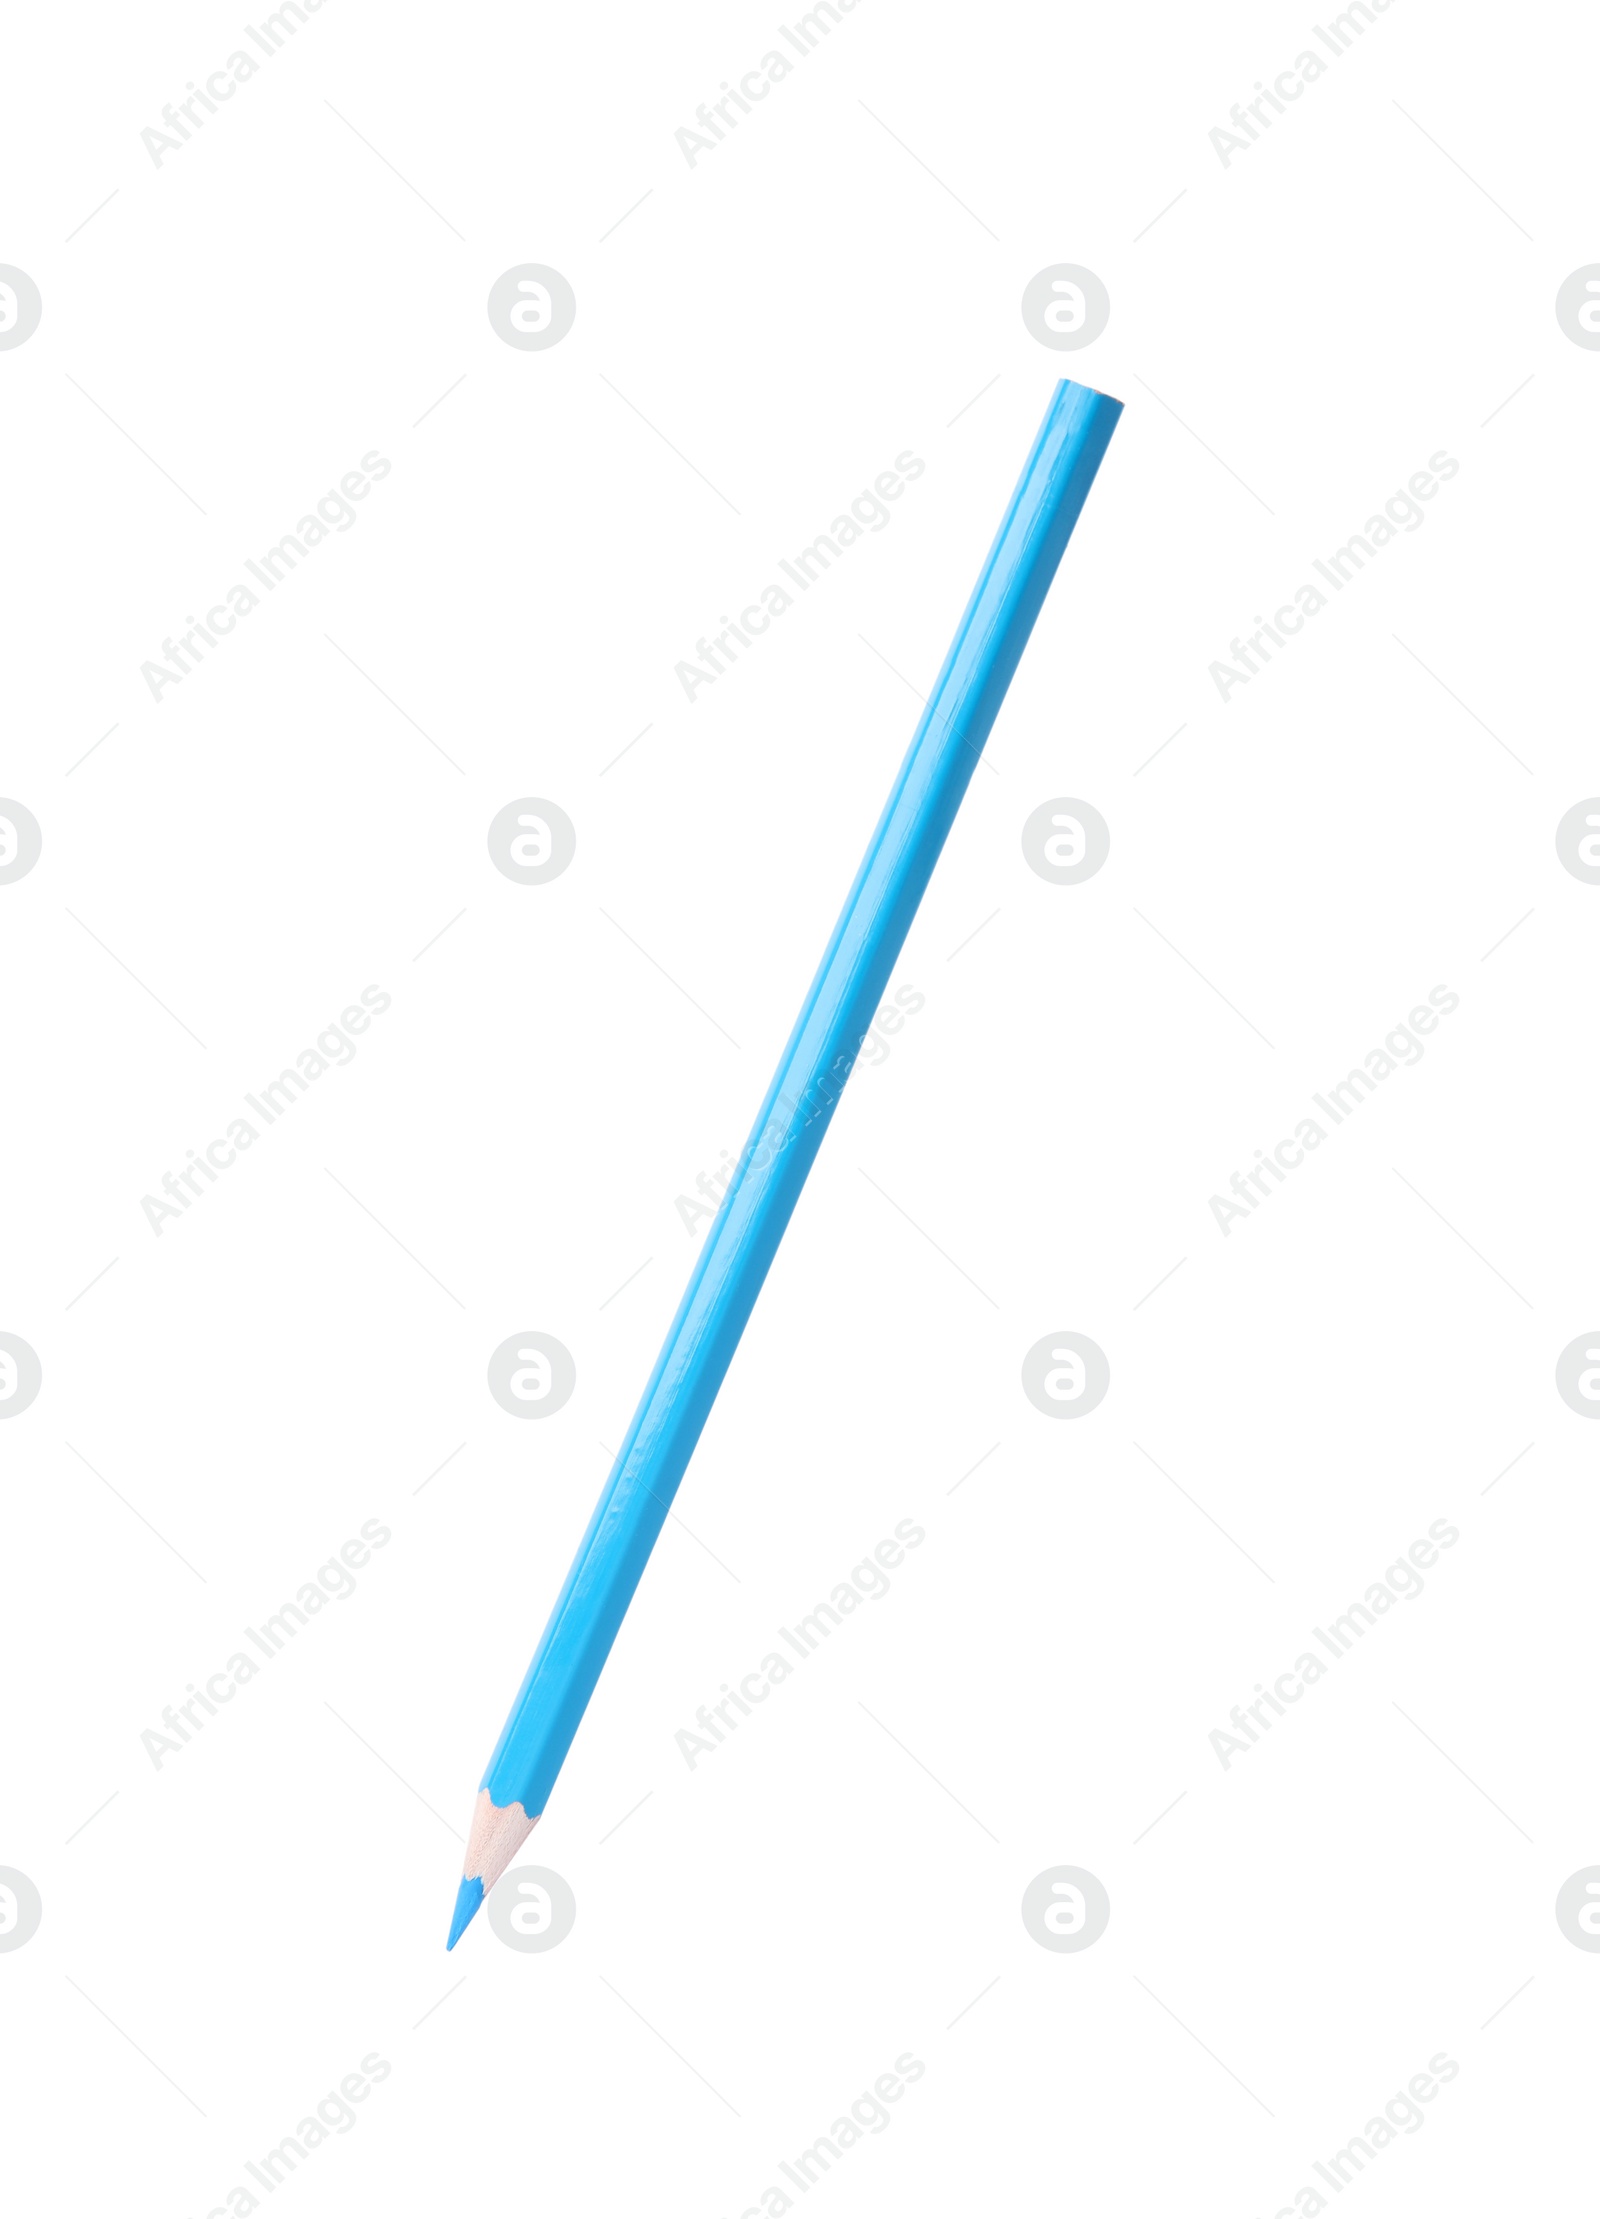 Photo of Light blue wooden pencil on white background. School stationery